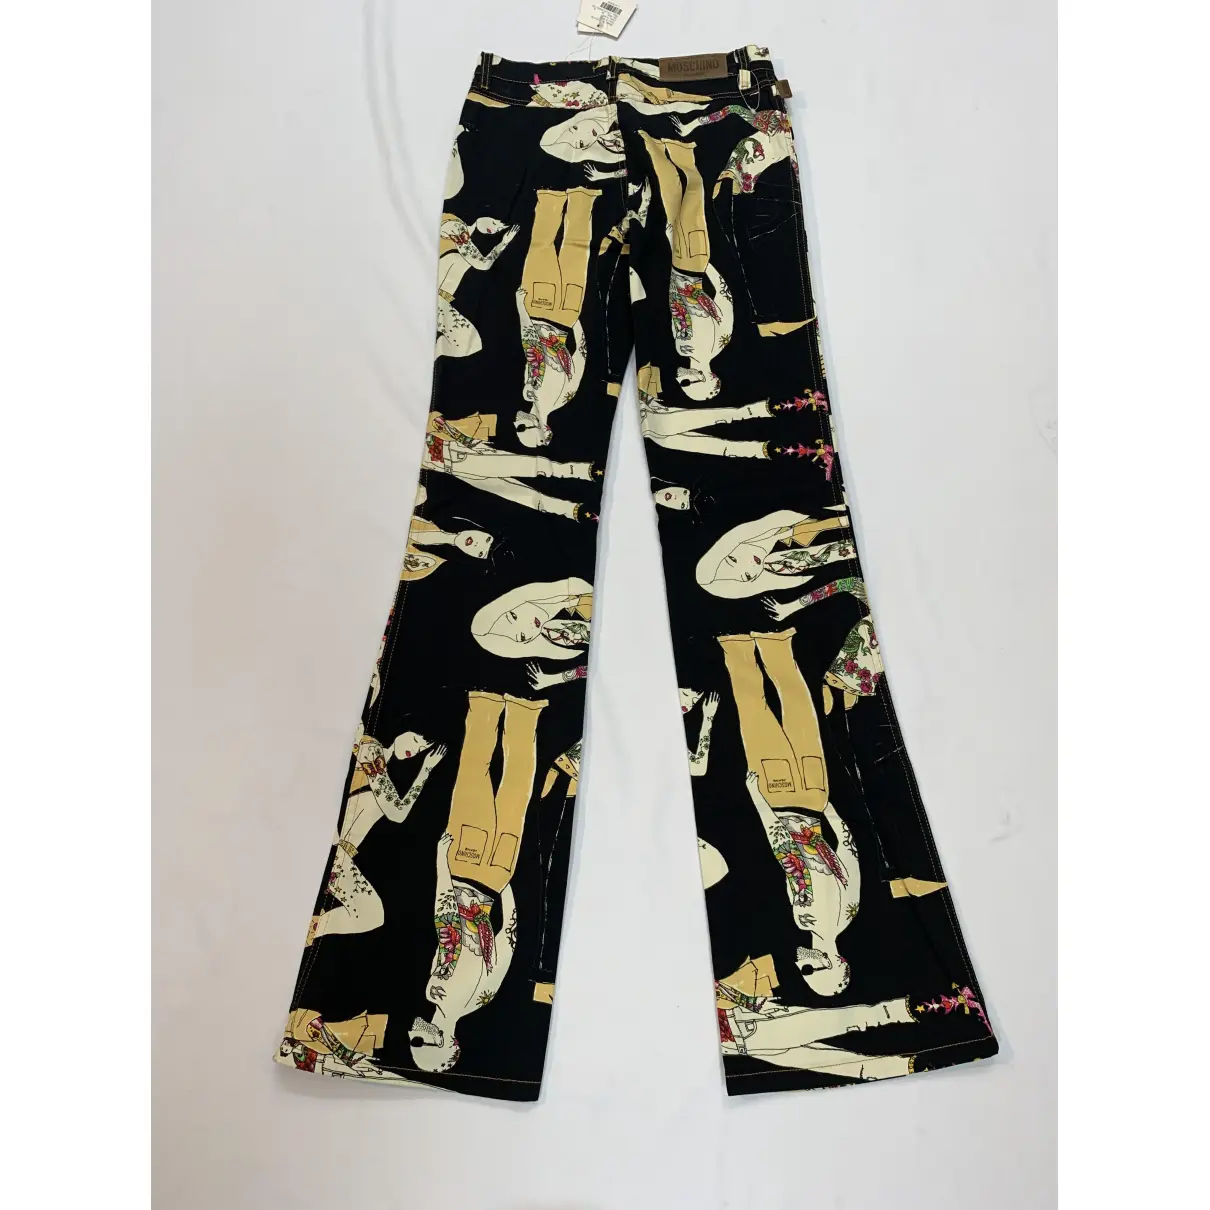 Buy Moschino Bootcut jeans online - Vintage